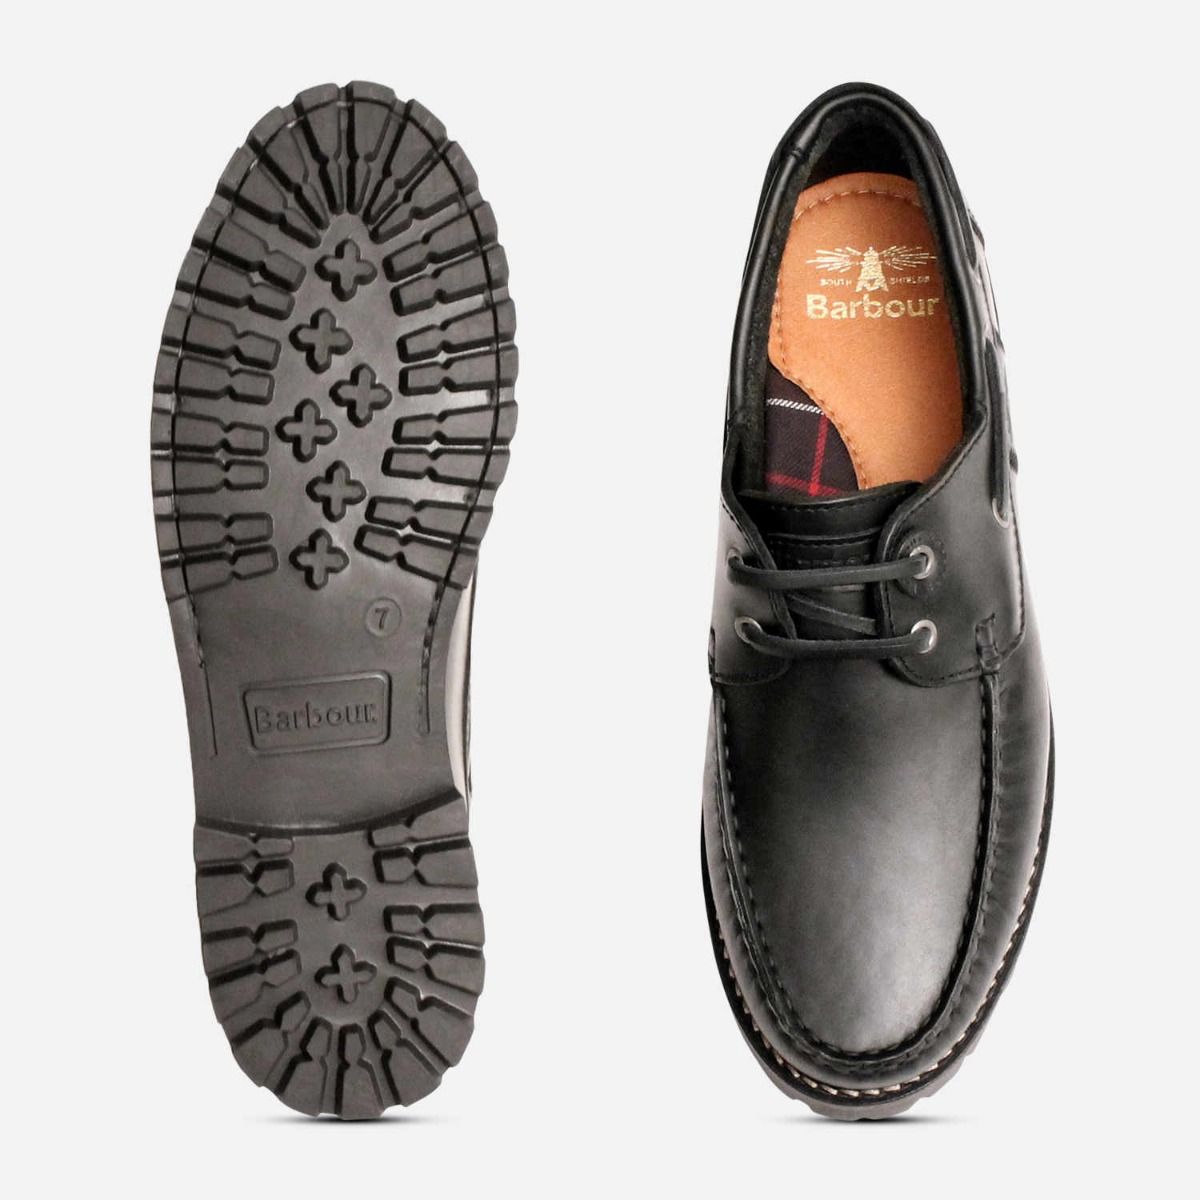 barbour leather shoes